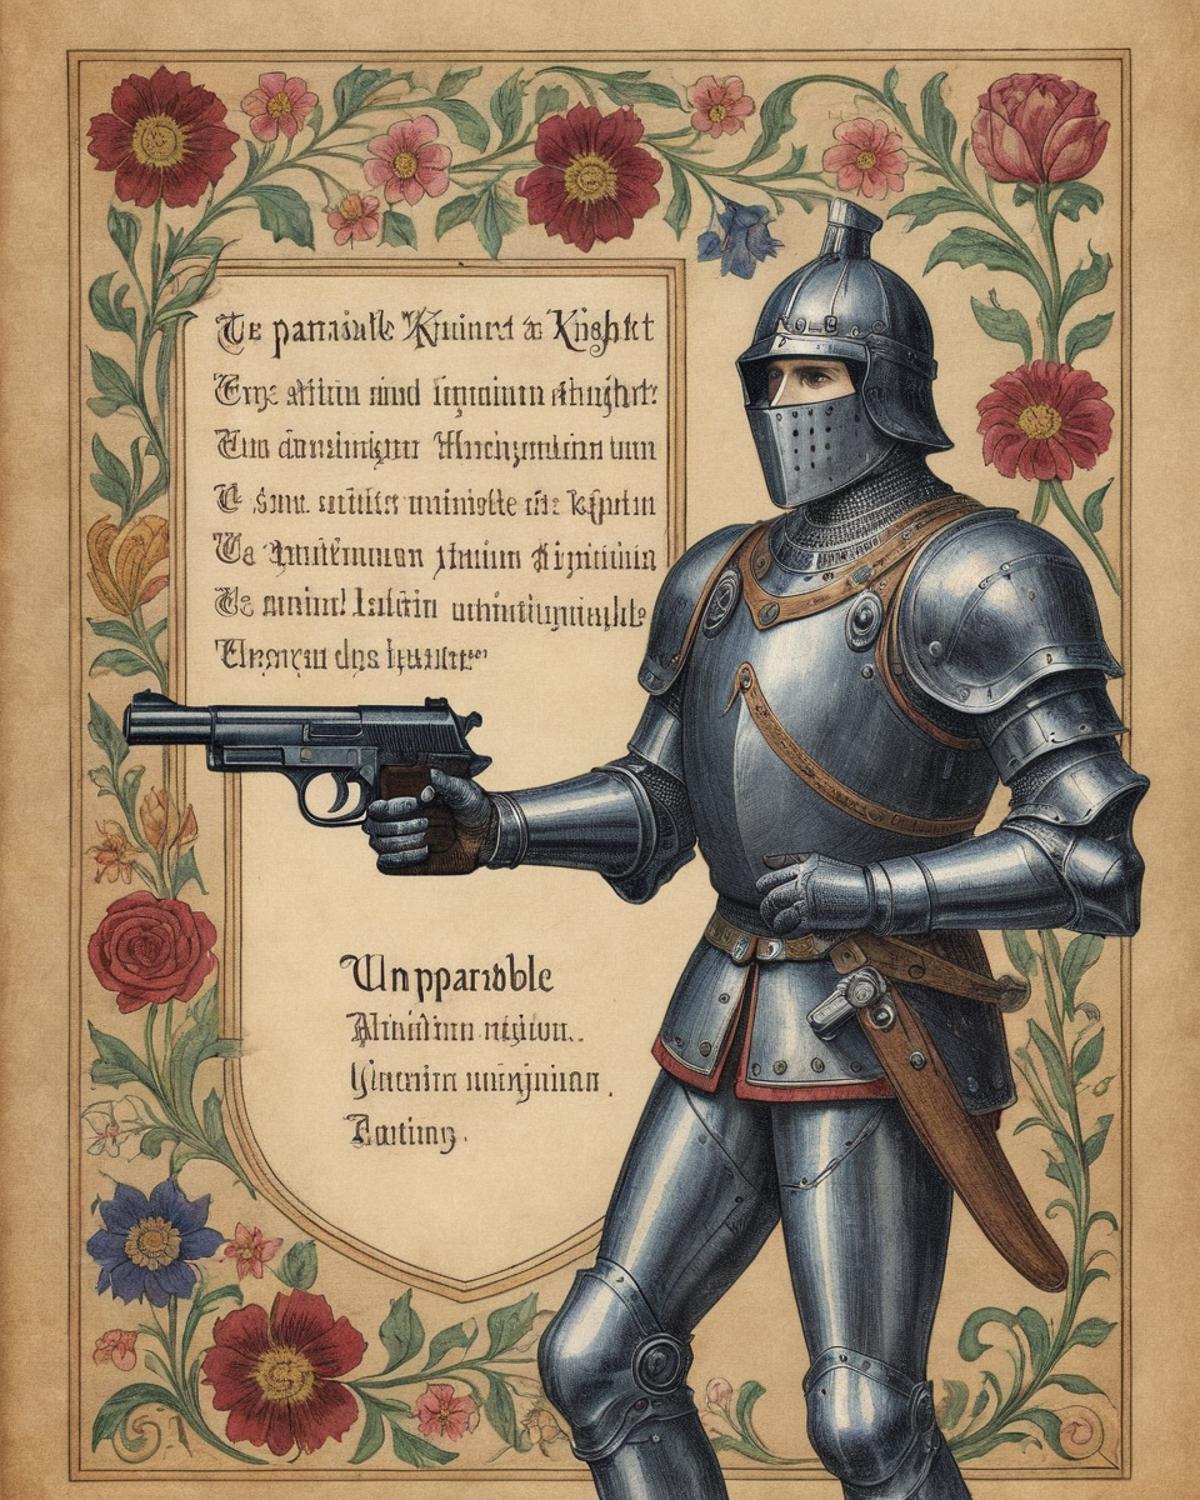 A knight in armor holding a gun, with a rose and floral design in the background.